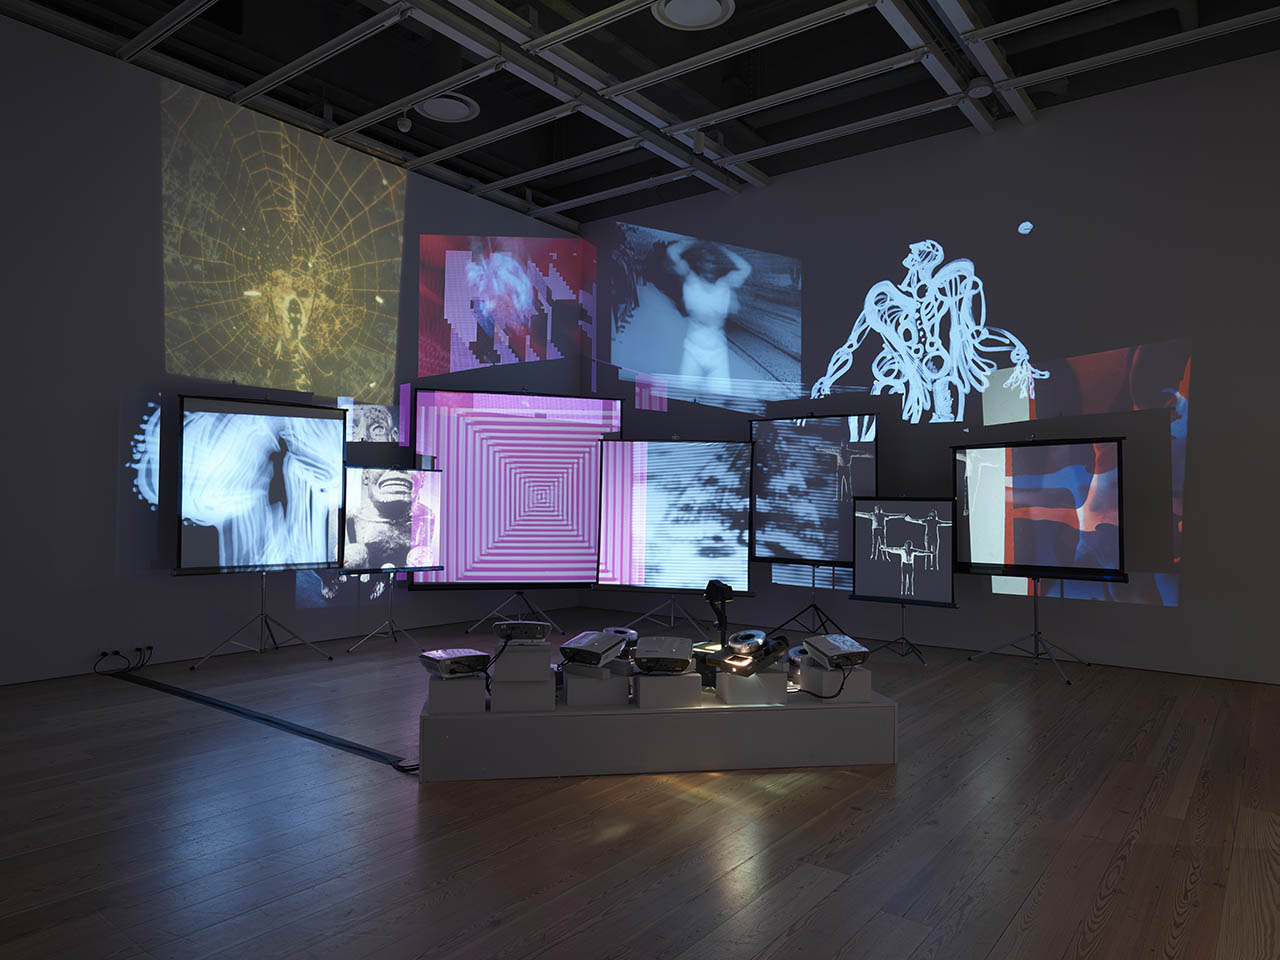 Installation view of multiple movie and slide projections in both black and white and color